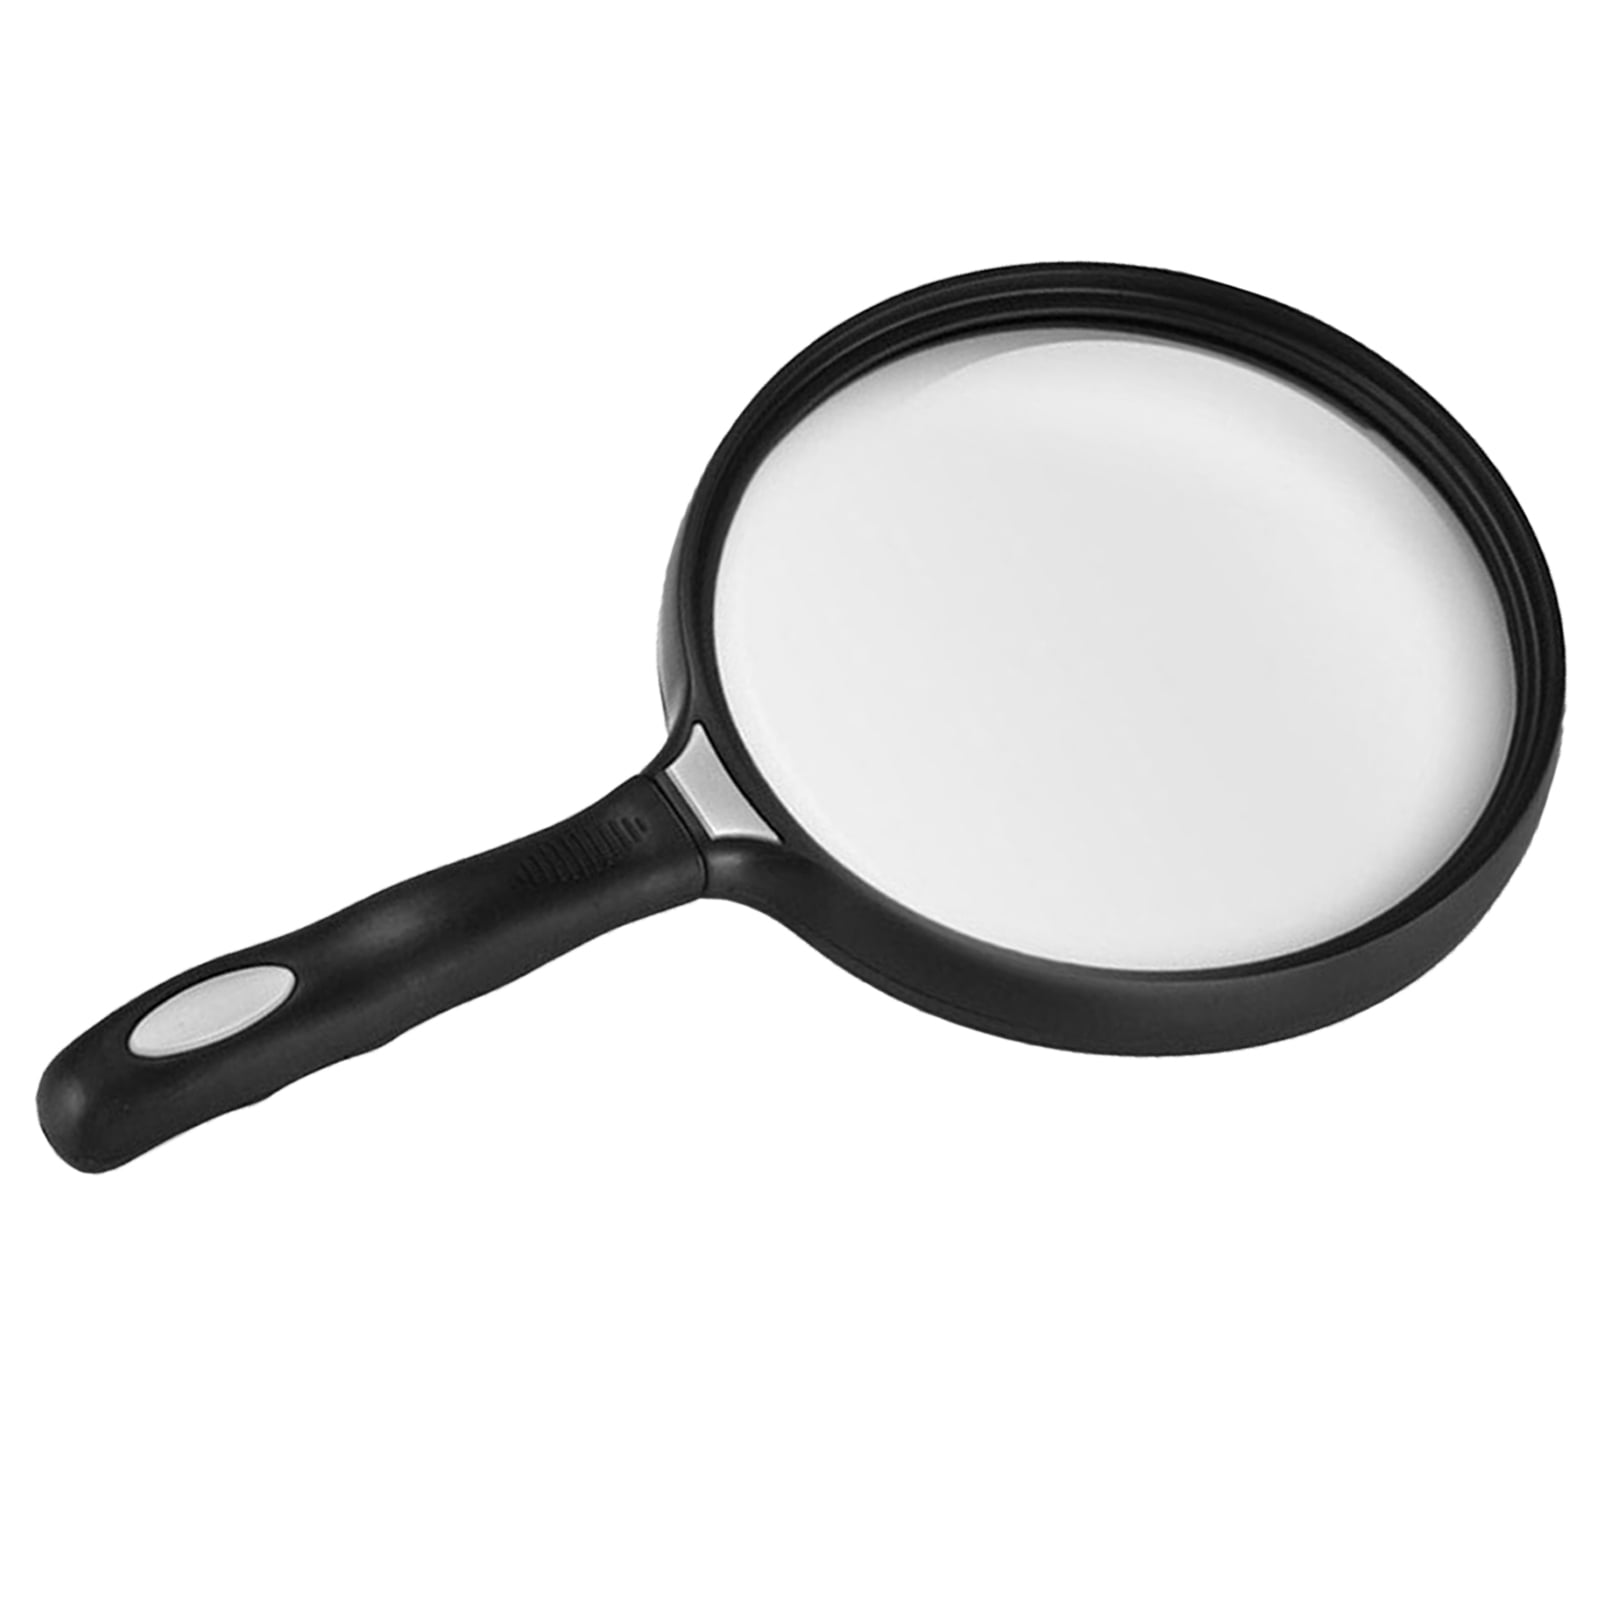 2.5X Handheld Magnifier Extra Large Magnifying Glass Reading Loupe Round Lens 